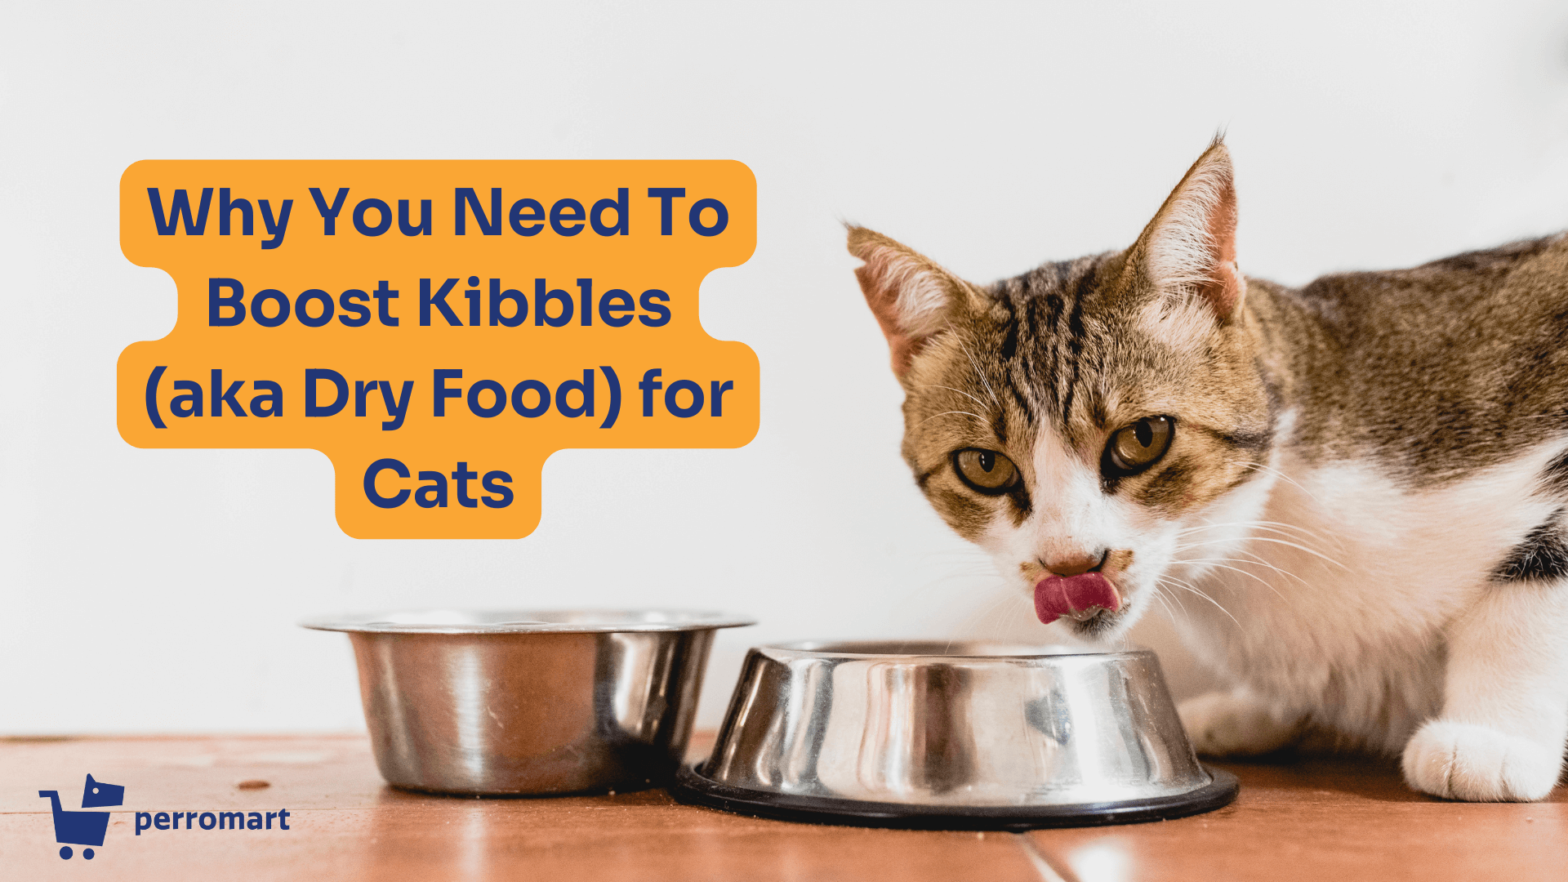 Why You Need To Boost Kibbles (aka Dry Food) for Cats